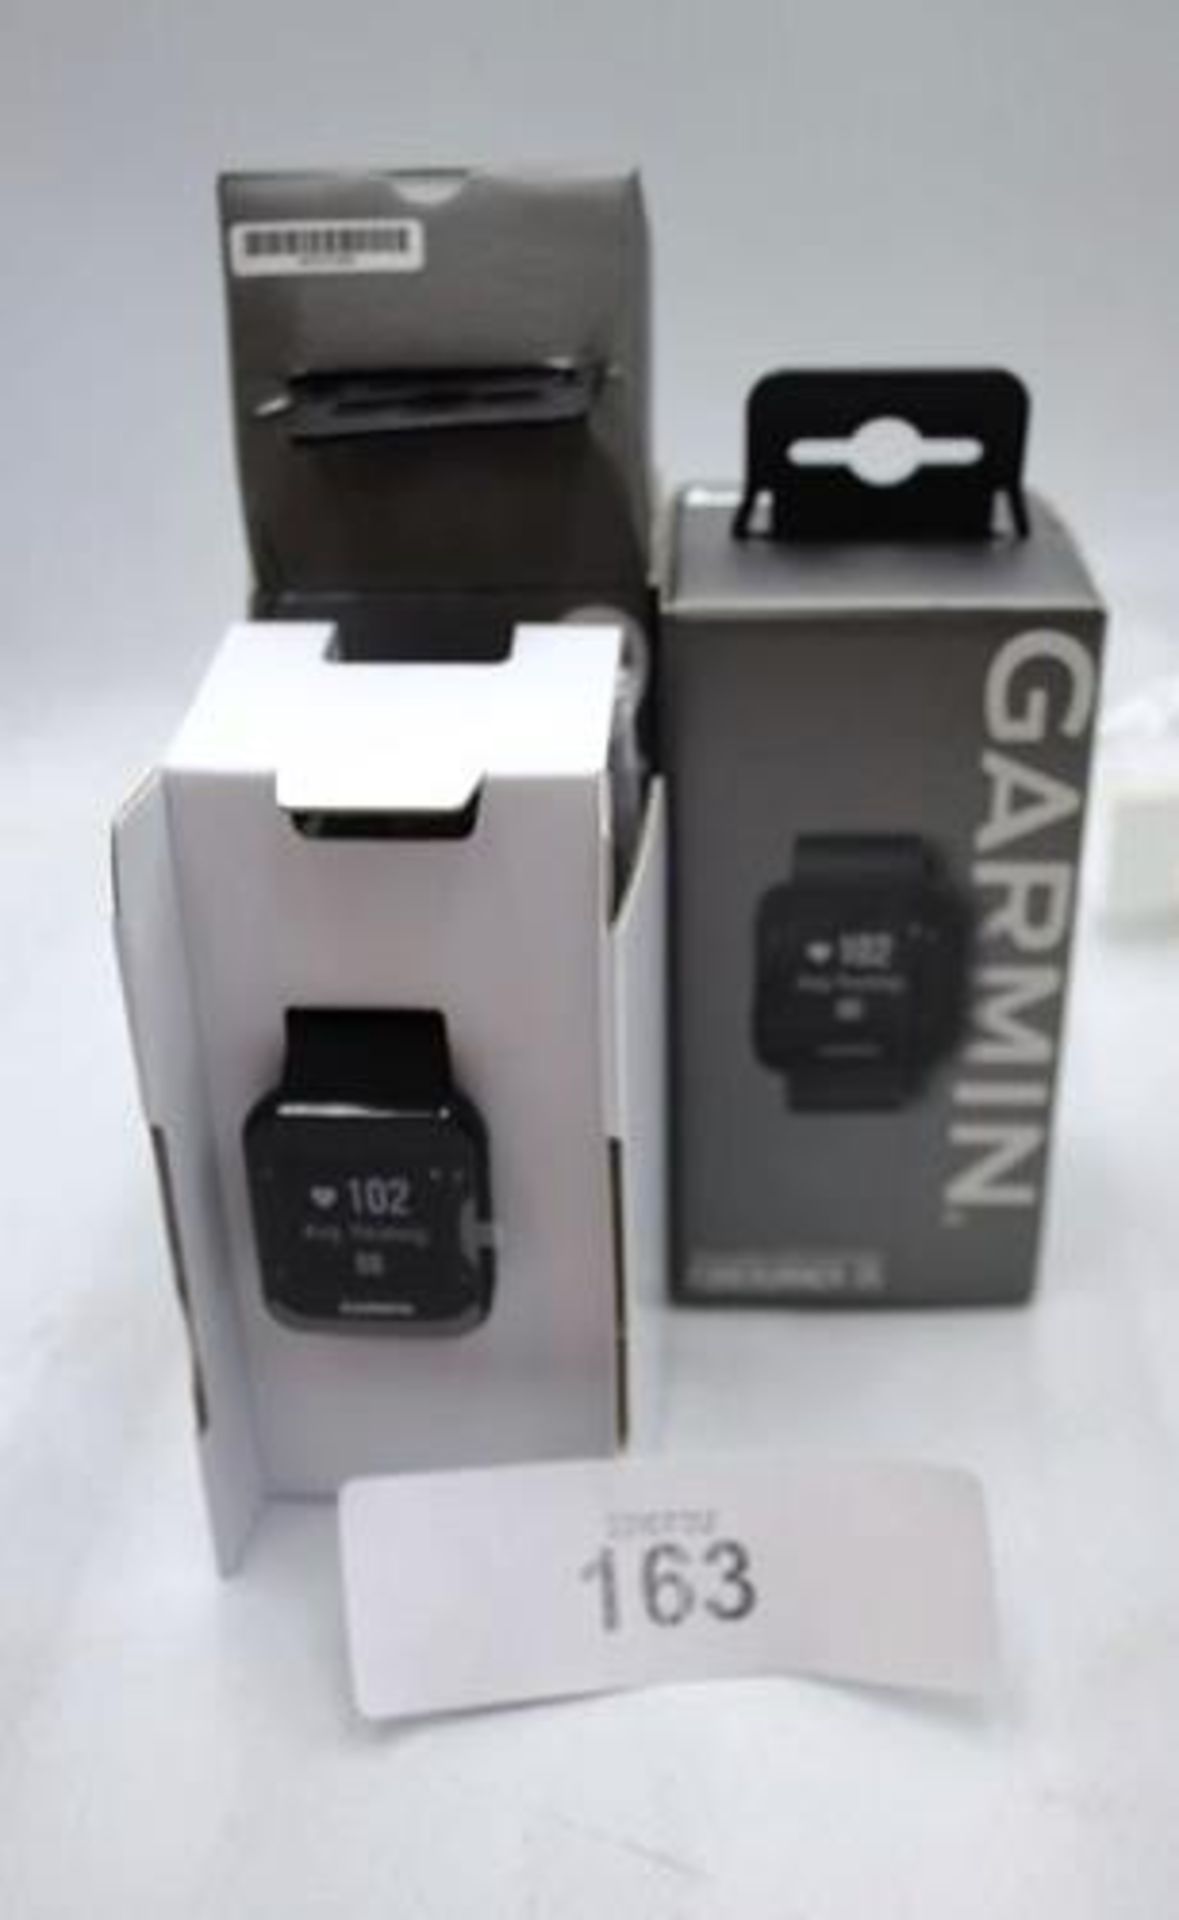 2 X Garmin Forerunner 45 sports watches, model 010-01689-10 - sealed new in box (Cab 2)